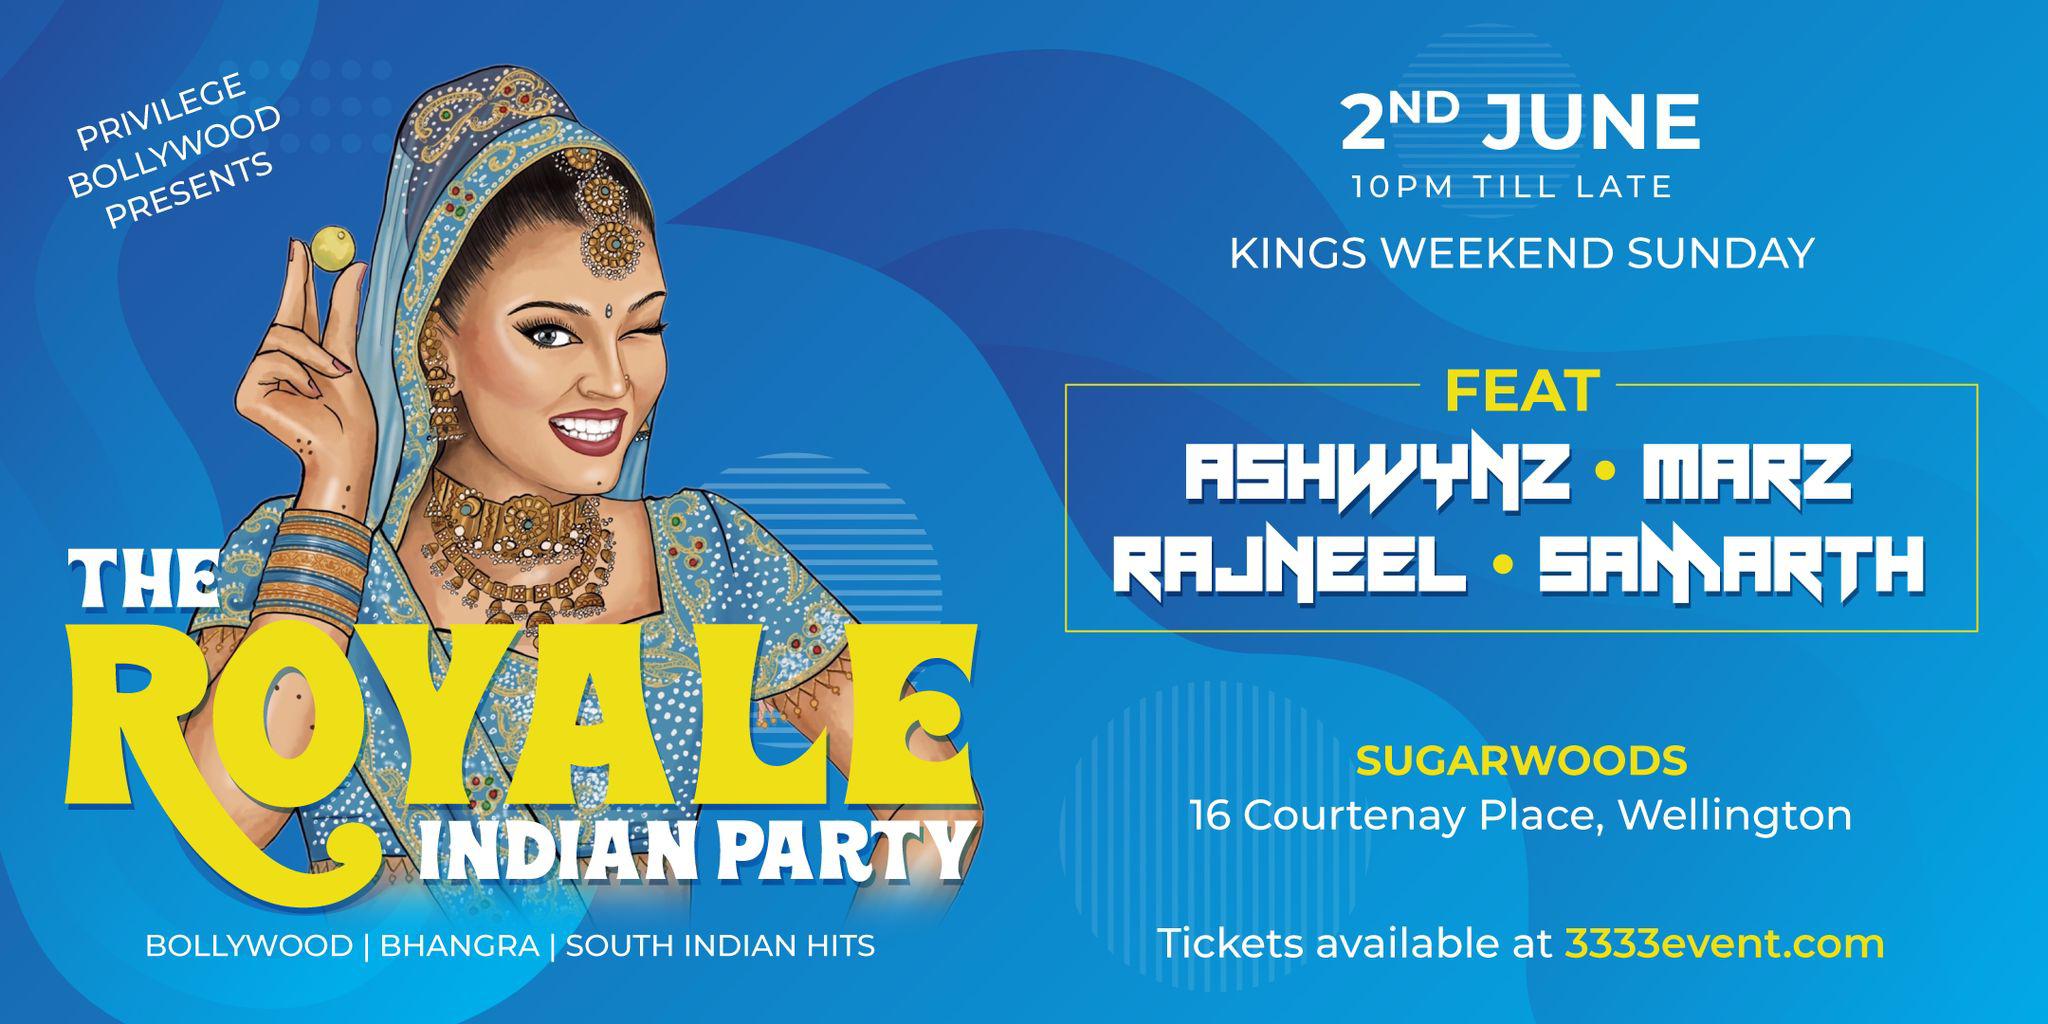 Privilege Bollywood Presents The Royale Indian Party: A Night of Glitz, Glamour and Grooves!